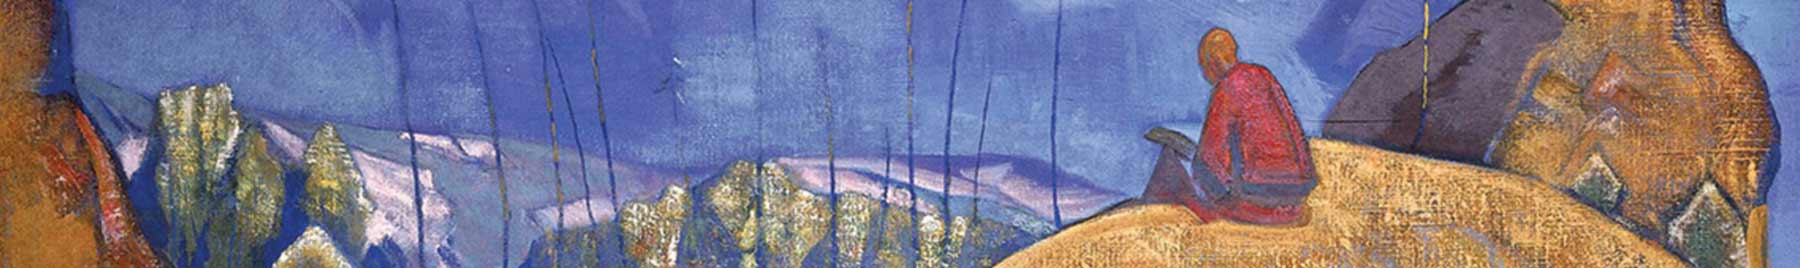 Detail from Nicholas Roerich, Book of Wisdom